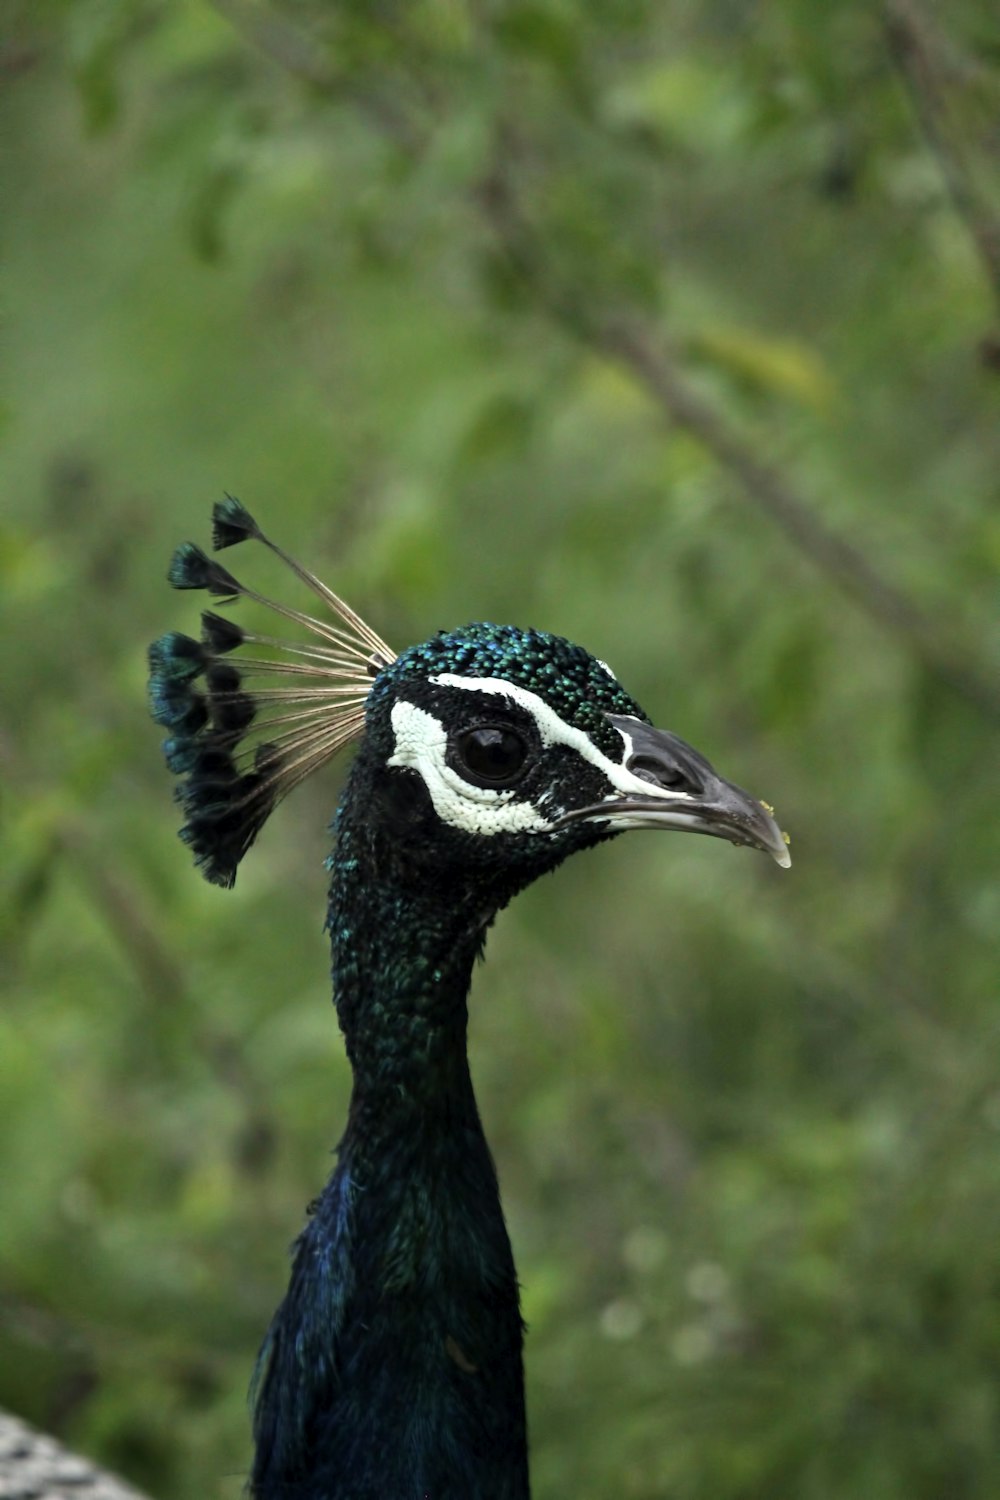 a peacock with a black and white head and feathers